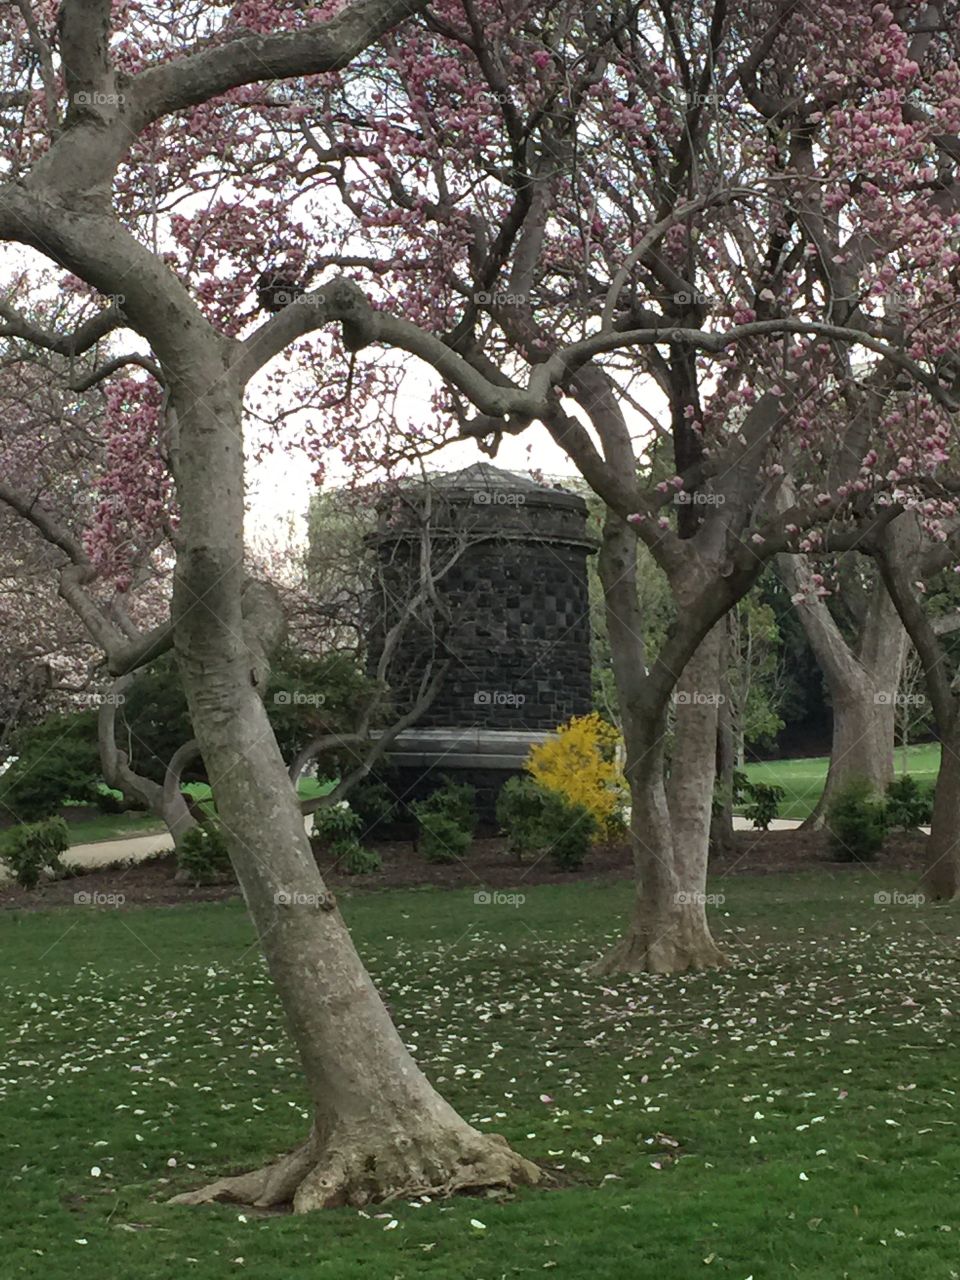 Capitol Grounds. Small structure next to cherry blossoms on the grounds of the U.S. Capitol